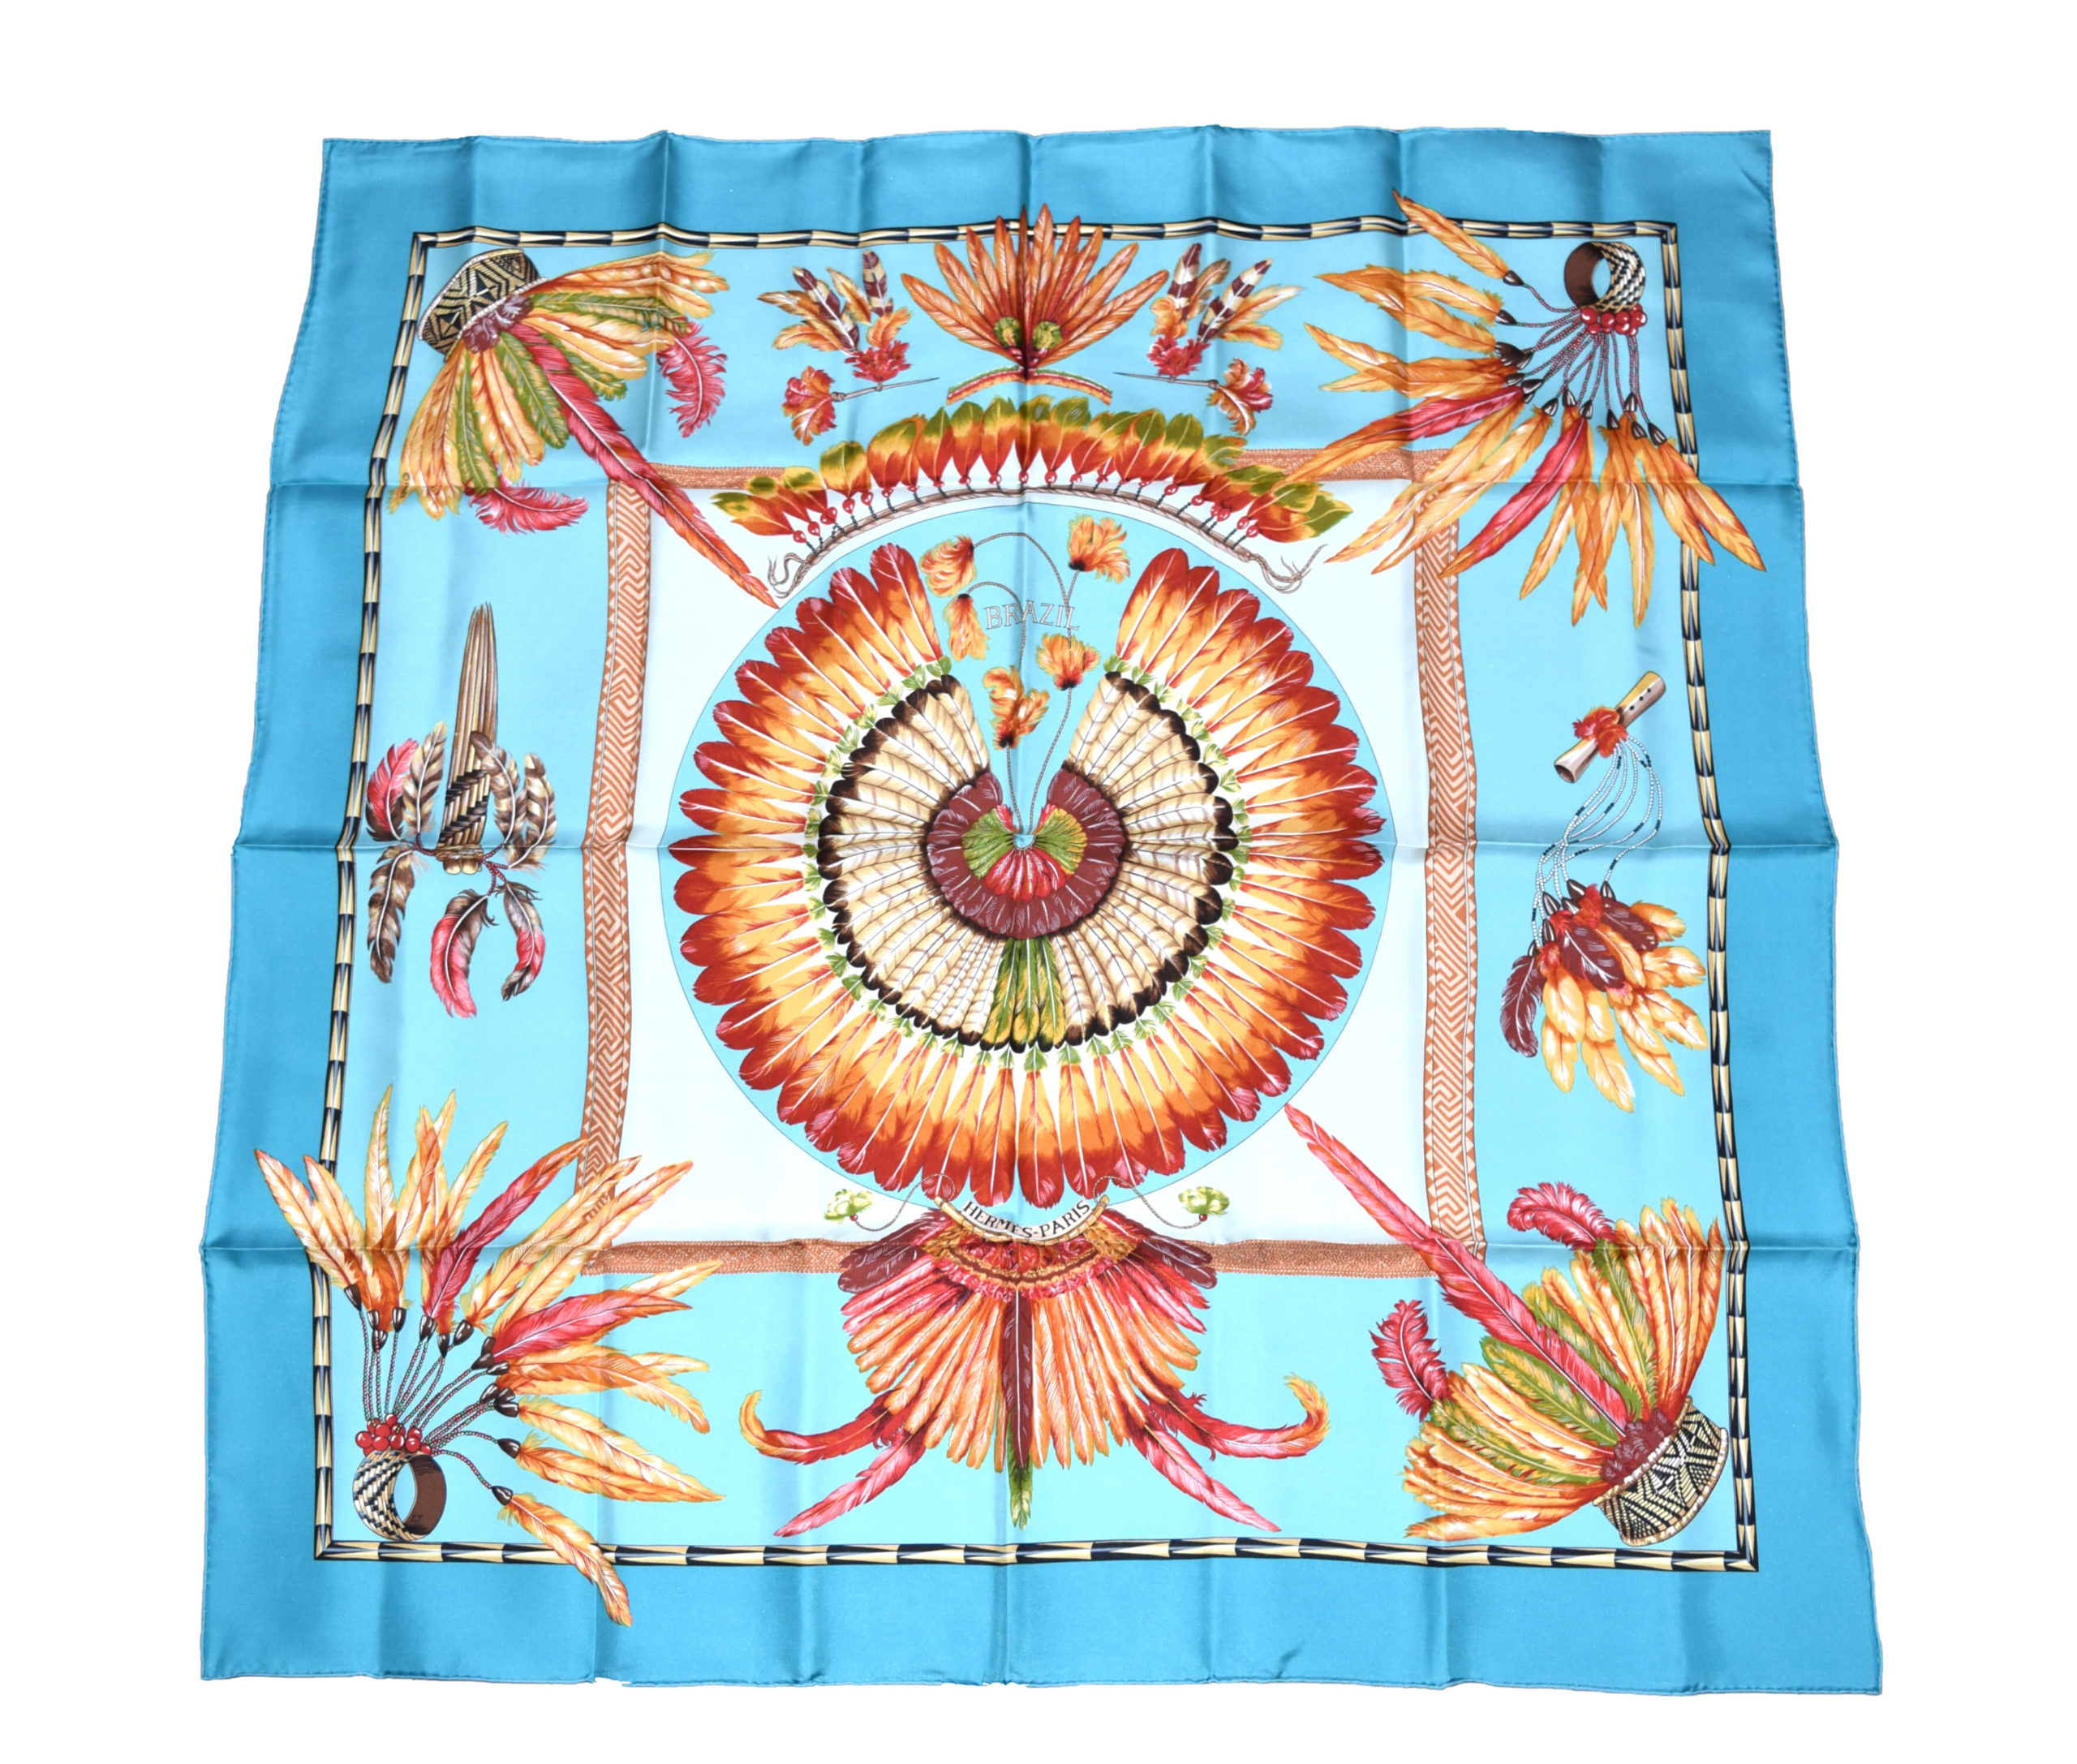 Hermes Scarf BRAZIL by Laurence Bourthoumieux Silk 90 cm Light Blue 35 ...